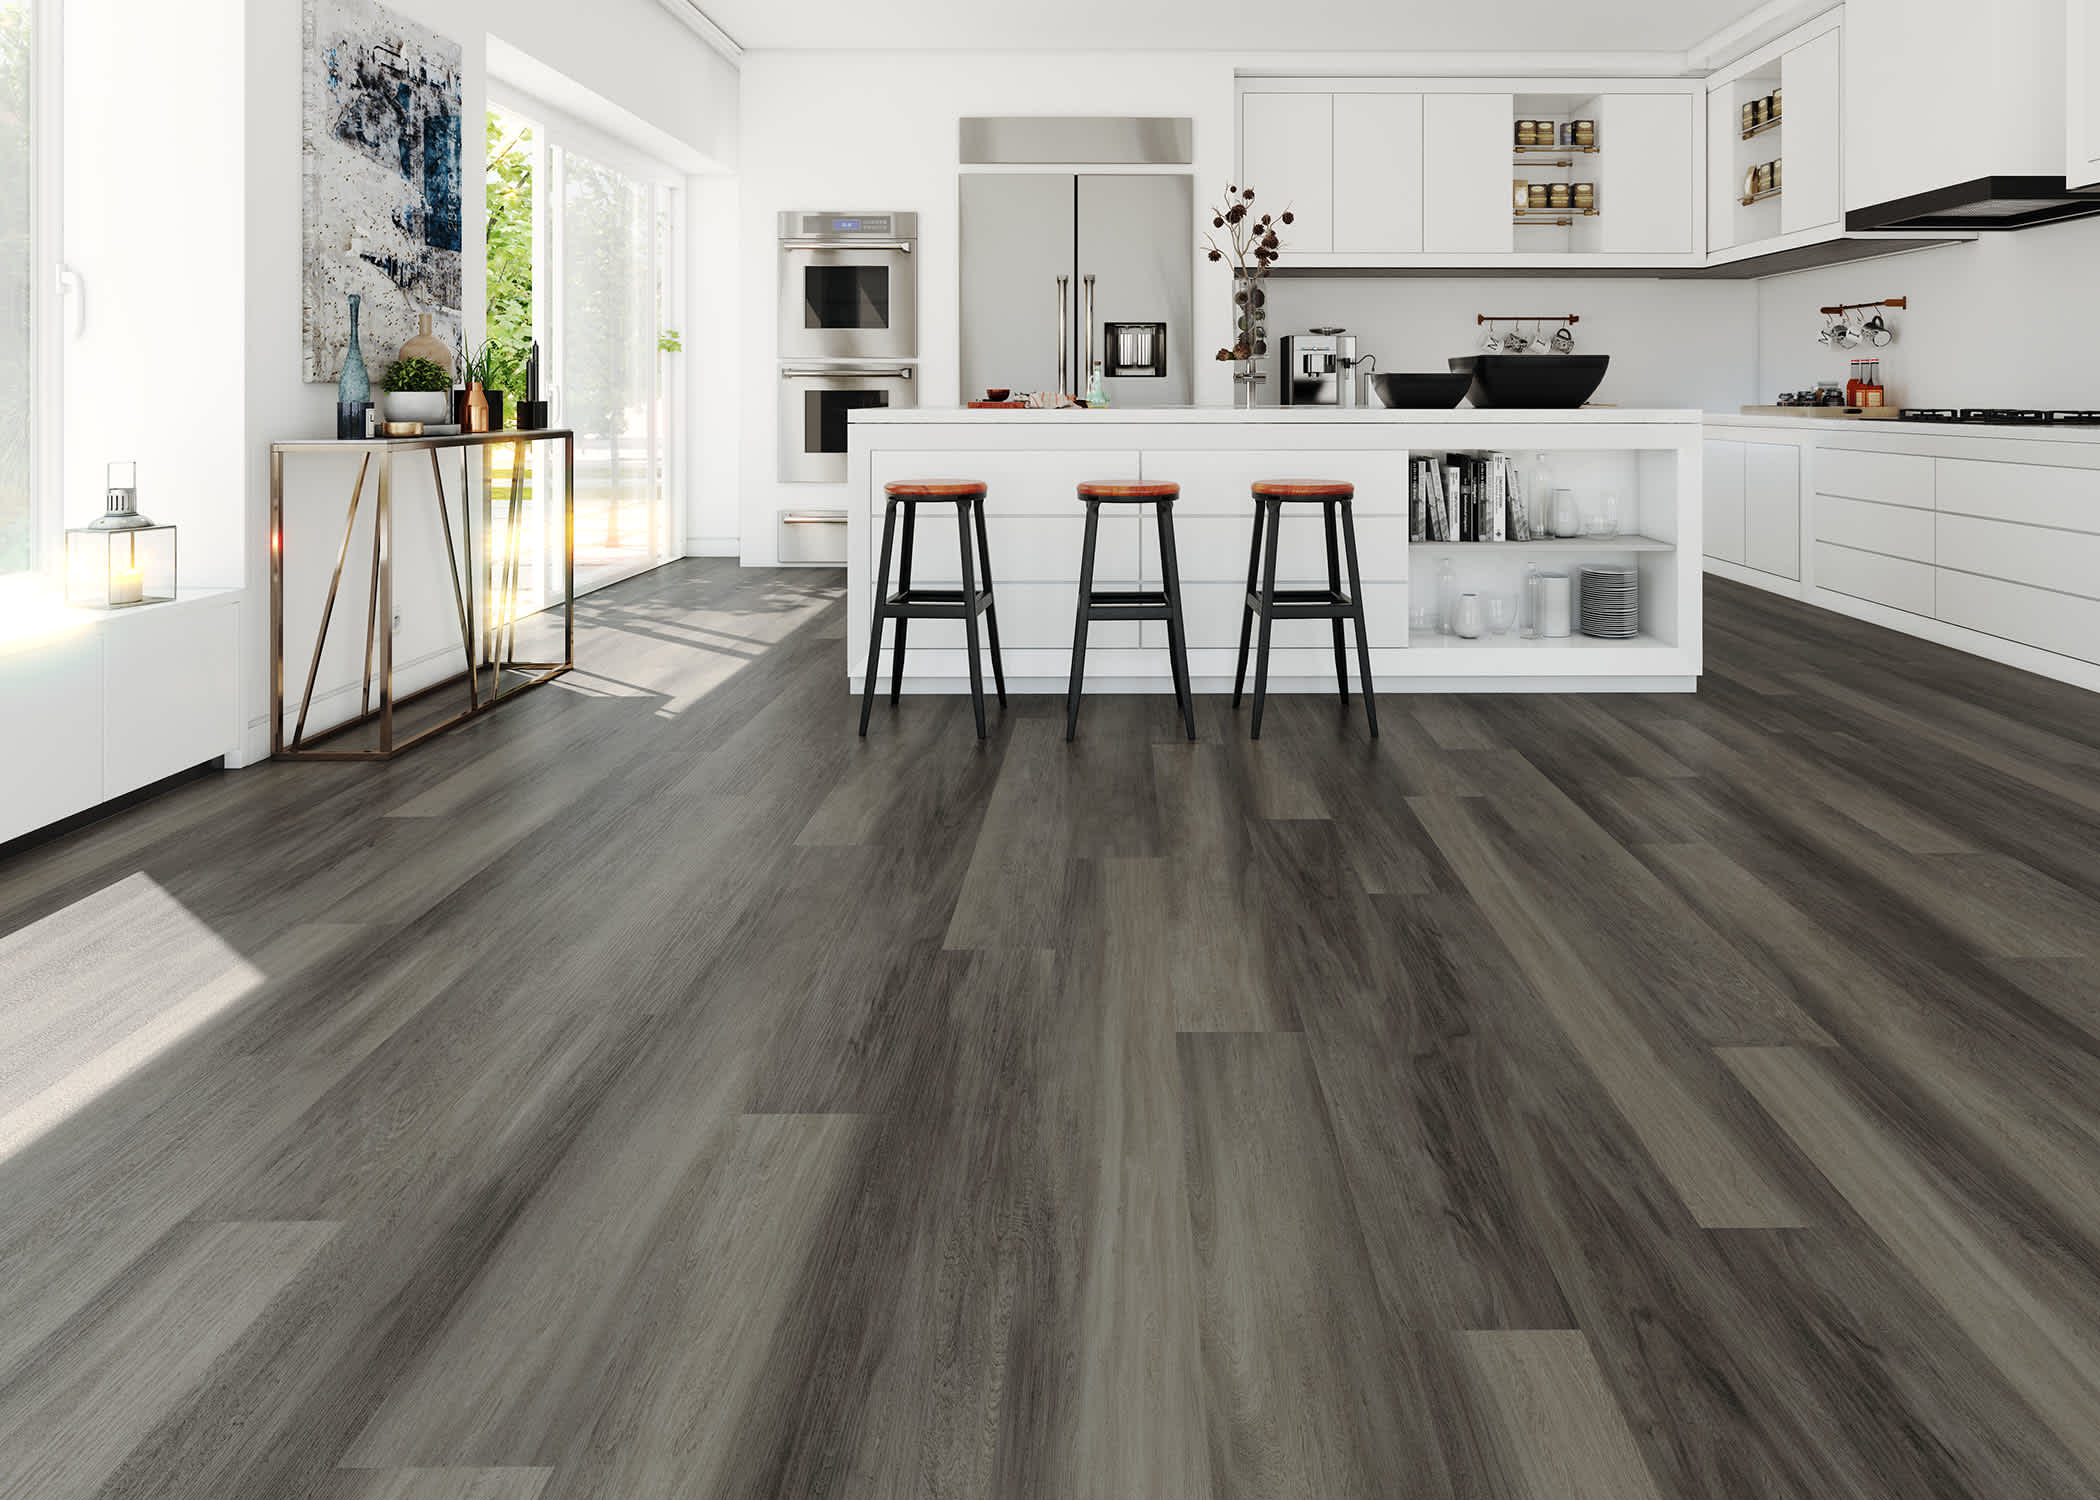 multi toned gray waterproof rigid vinyl plank floor in kitchen with white cabinets and countertops plus oversized island with three black barstools